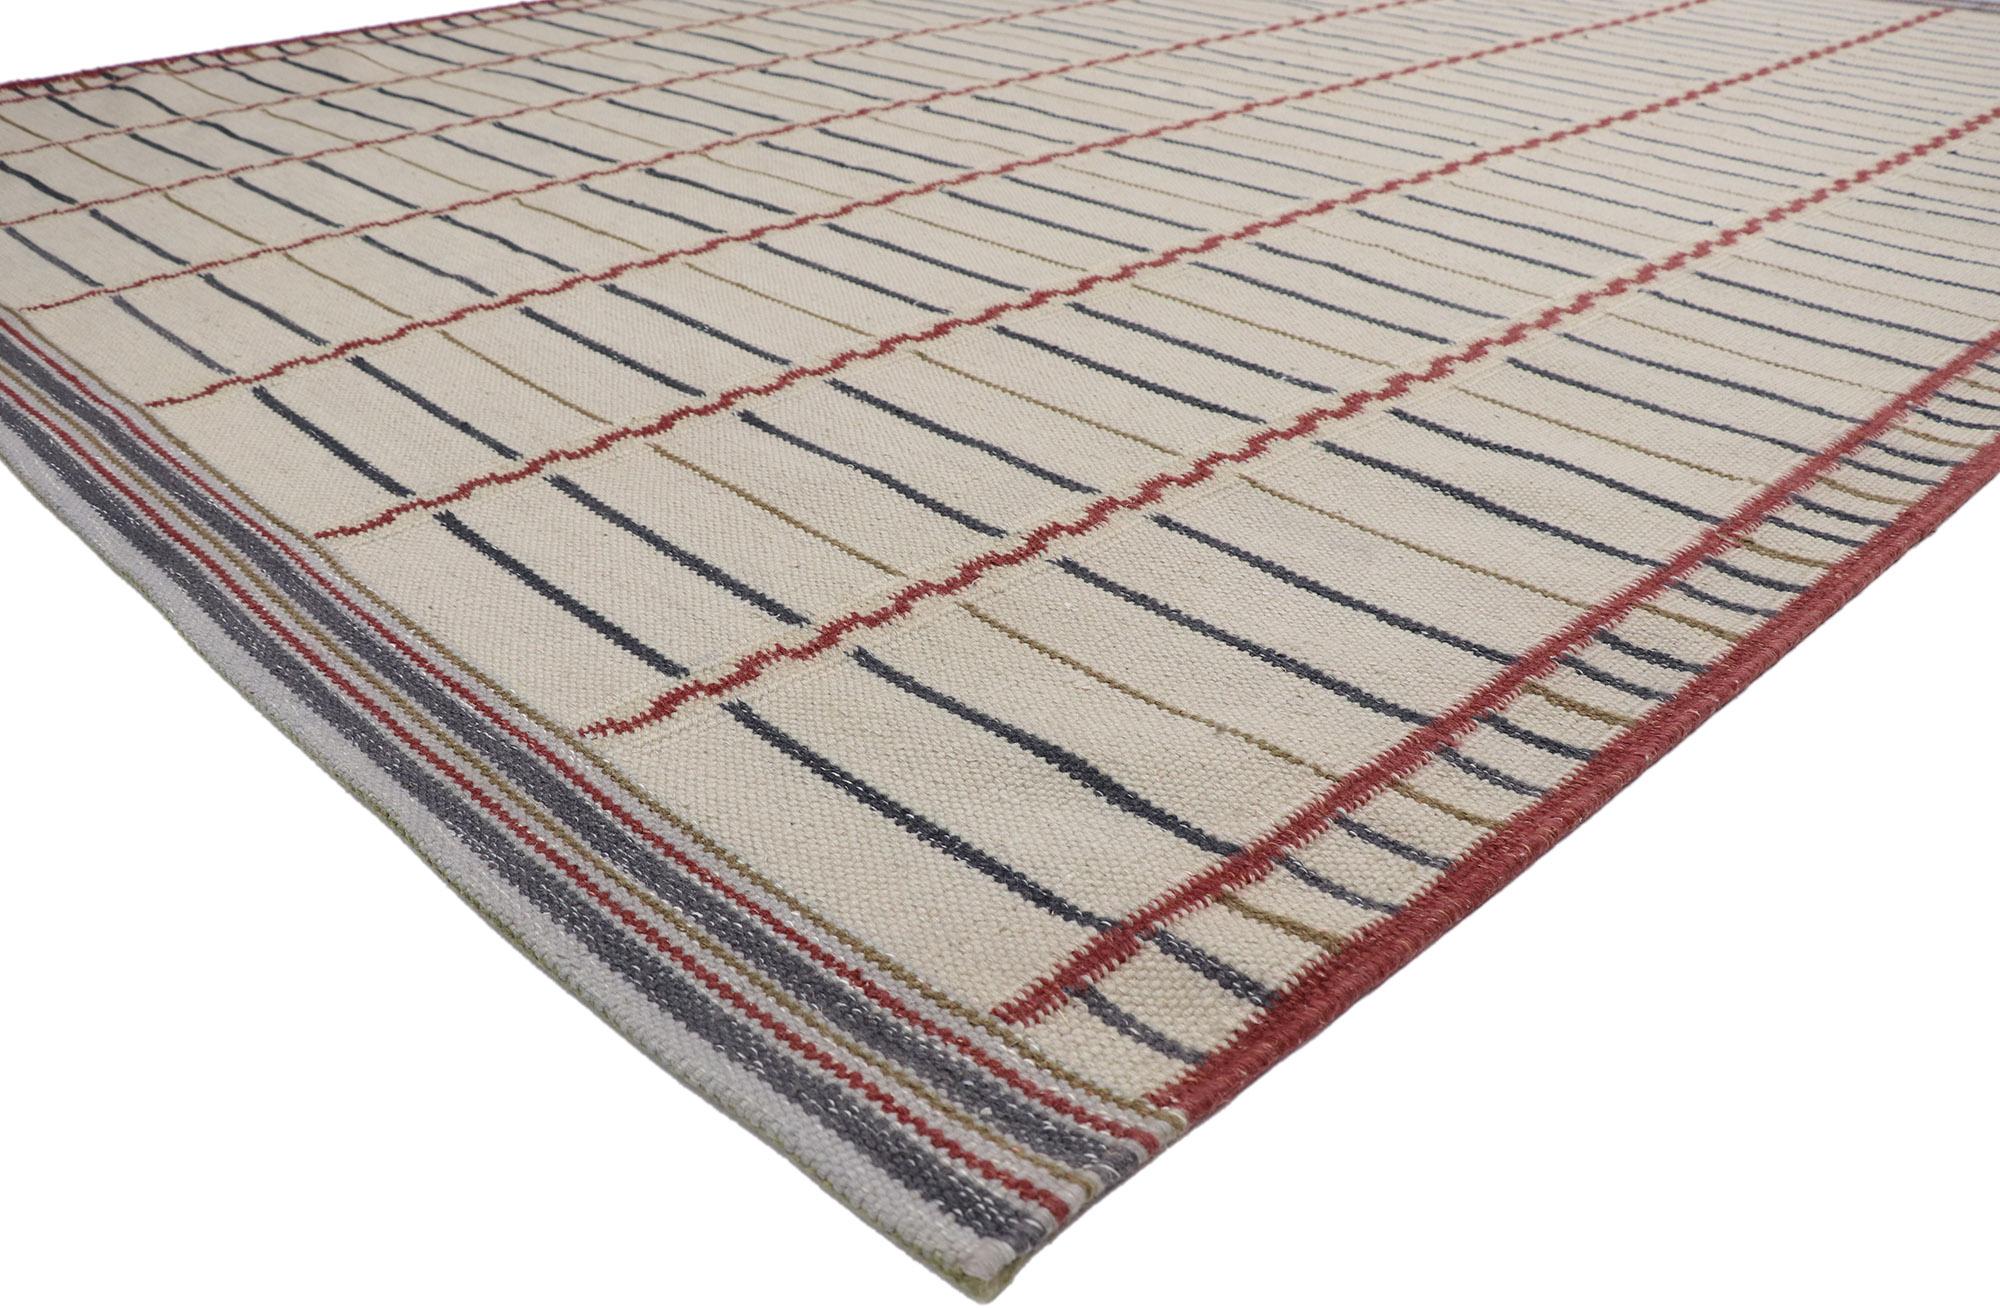 30666, new Swedish Inspired Kilim rug with Scandinavian Modern style. With its simplicity, geometric design and neutral color, this hand-woven wool Swedish Indian Kilim rug provides a feeling of cozy contentment without the clutter. The composition